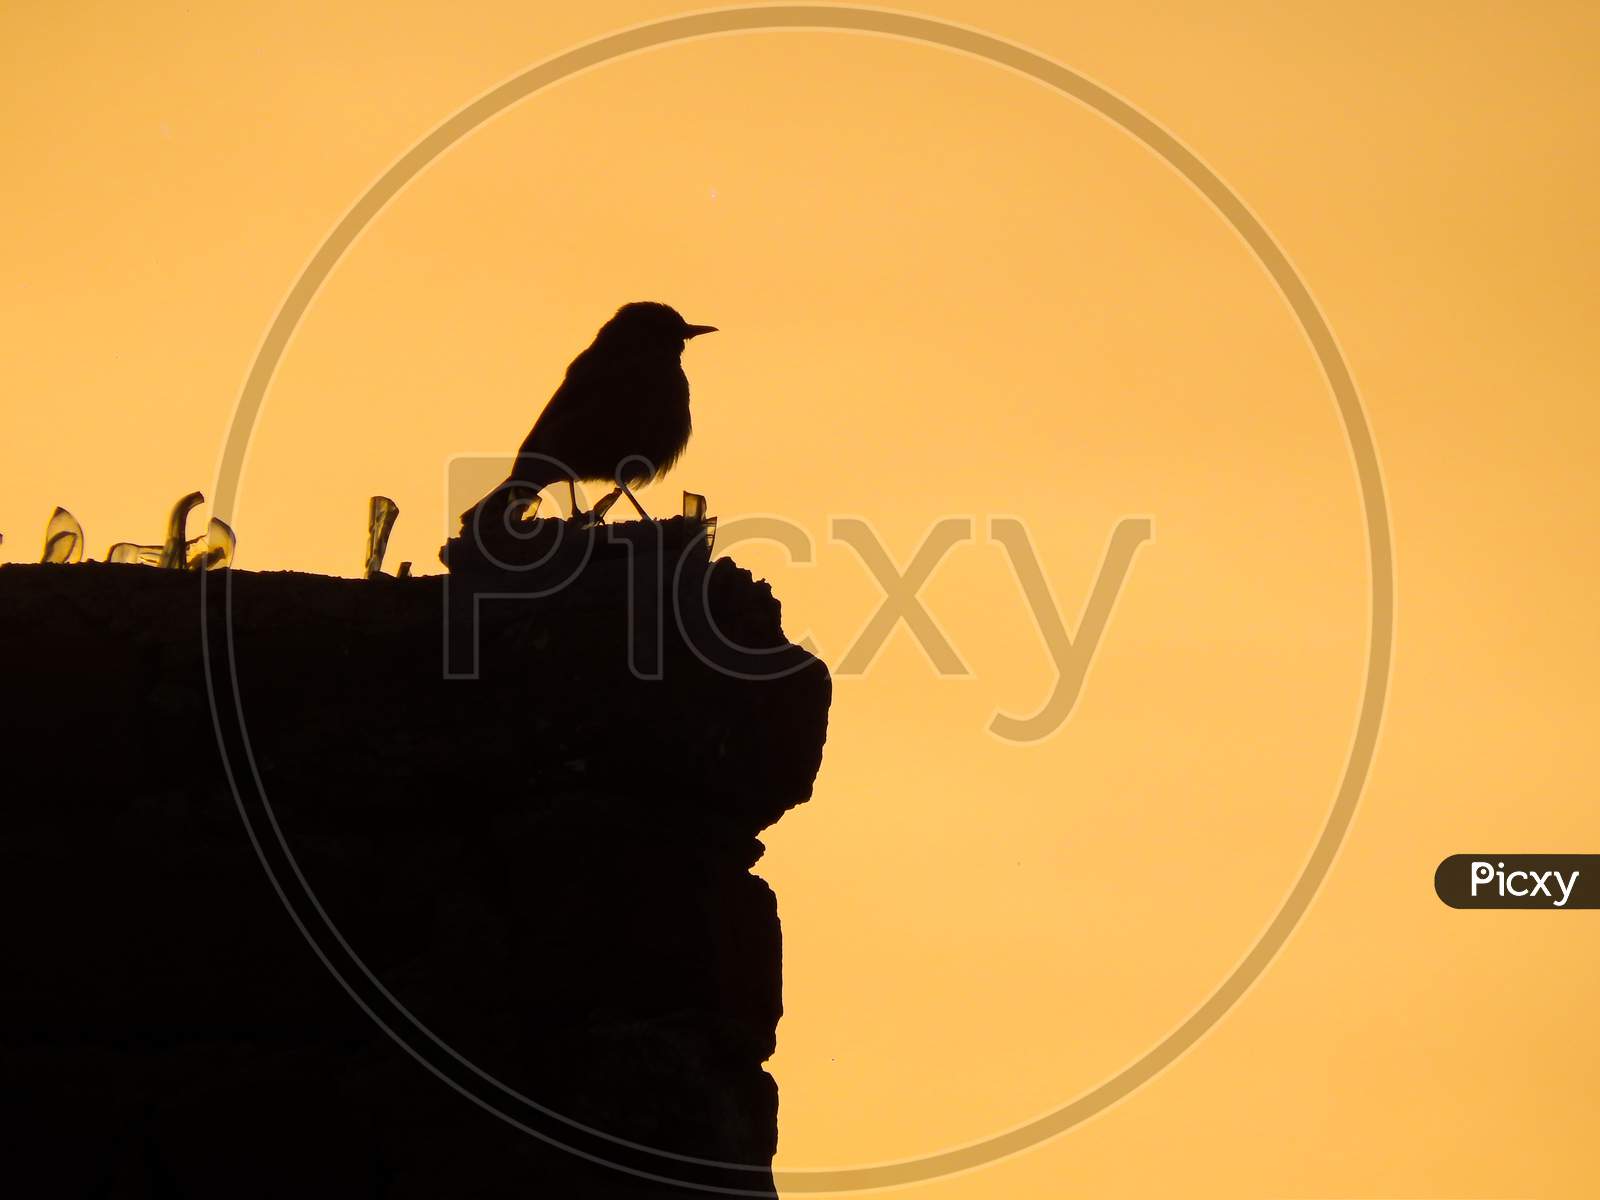 Bird Silhouette Sitting On A Brick Wall With Golden Yellow Sky In Background Background And Pieces Of Glass On Wall. Situation Of Birds In Cities Today. No Place For Them To Sit.